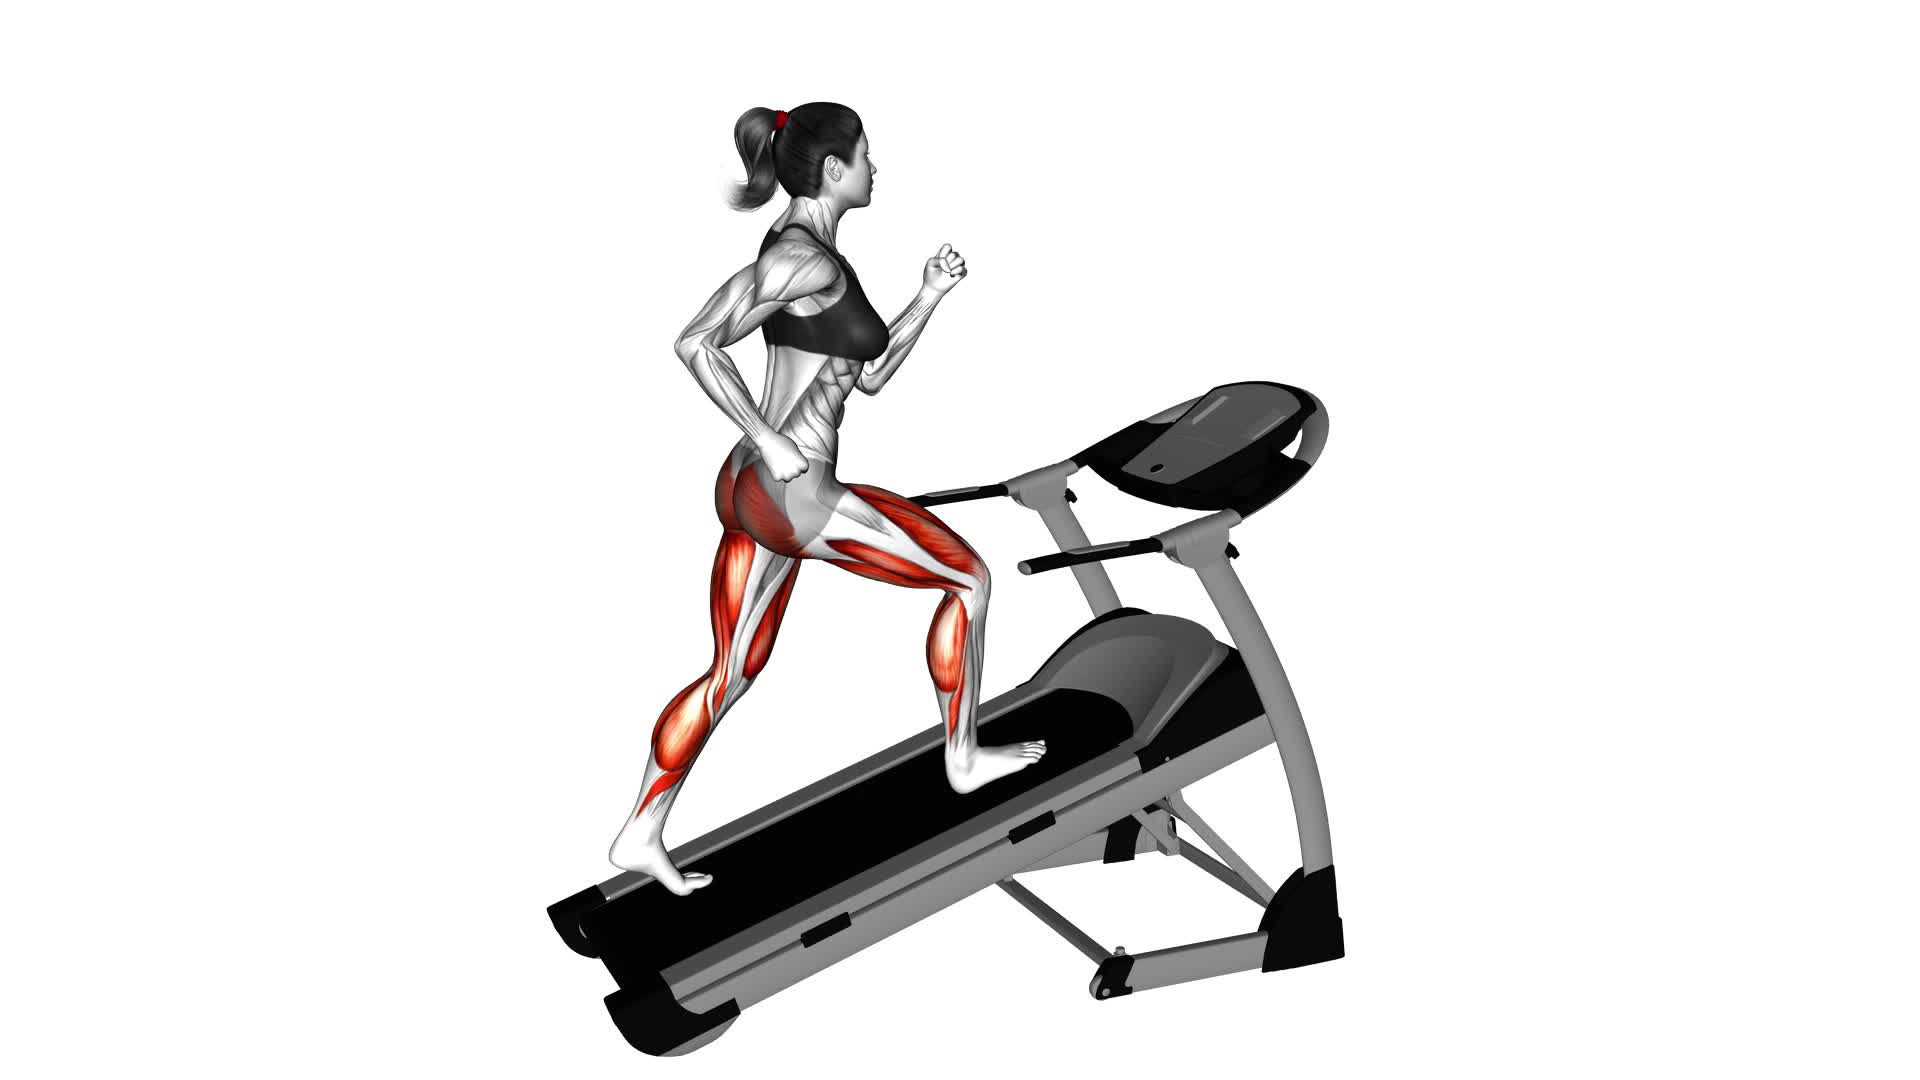 Walking on Incline Treadmill (female) - Video Exercise Guide & Tips